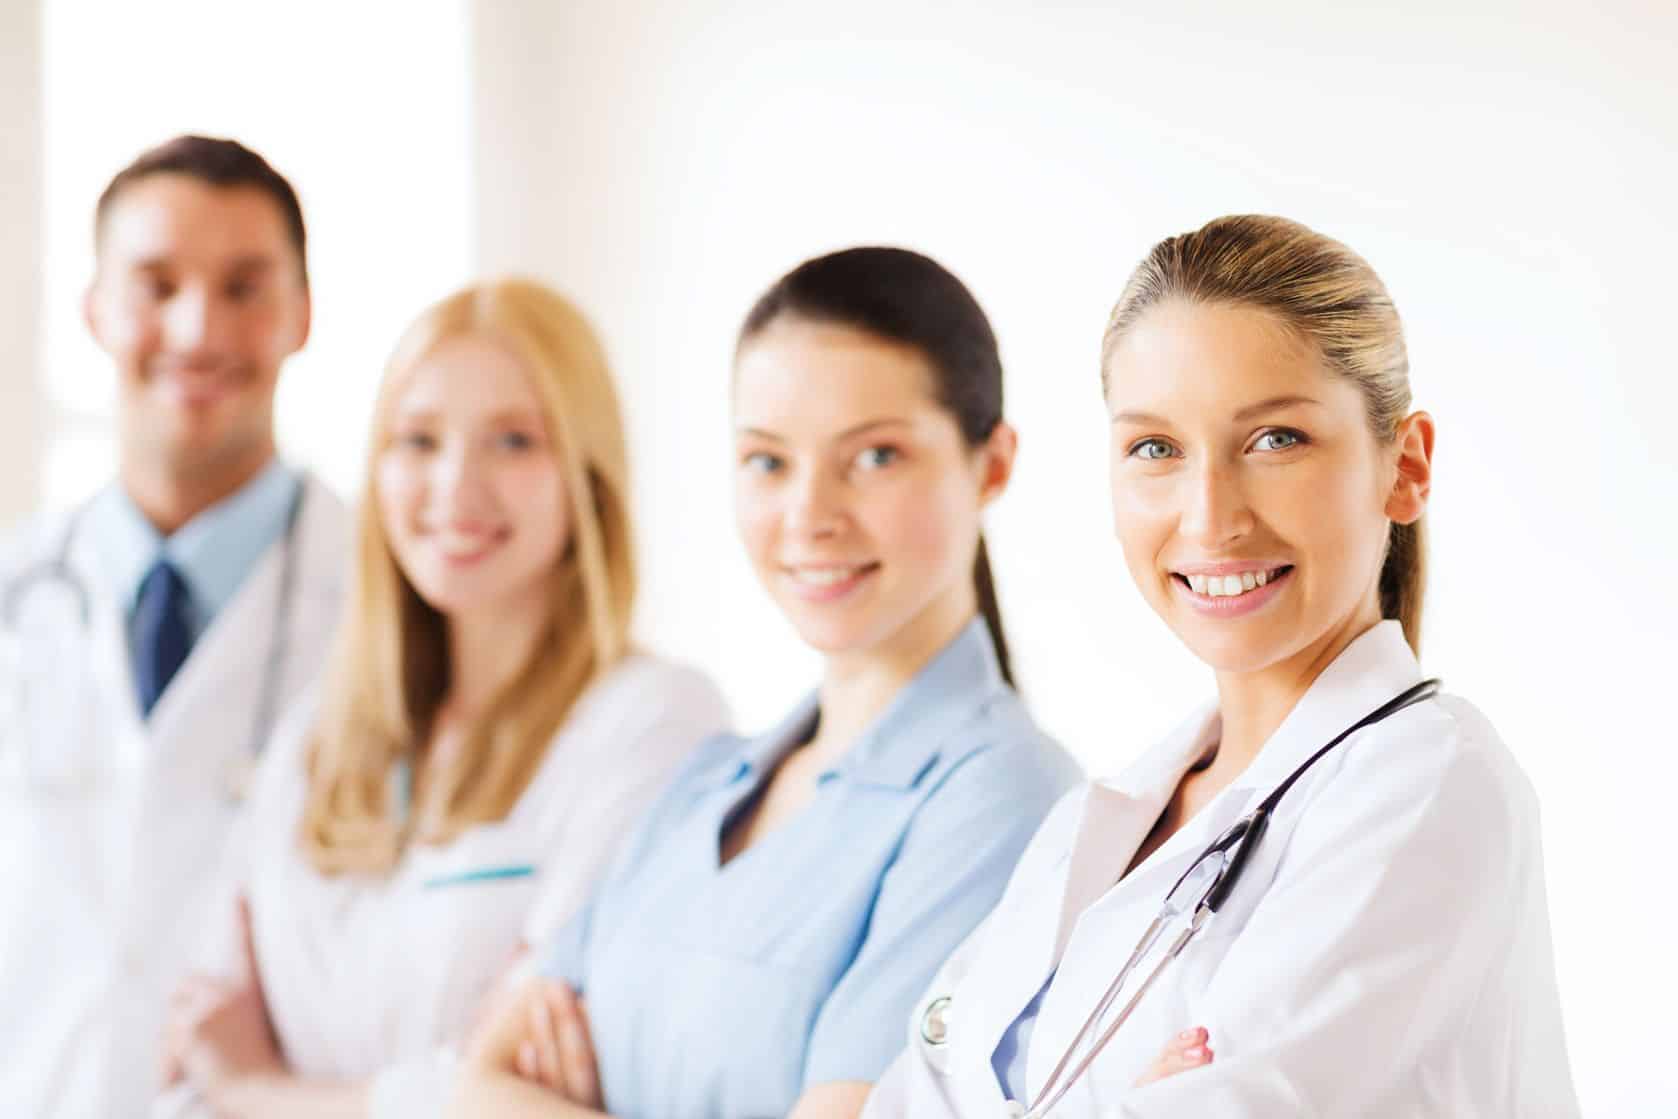 21276634 - healthcare and medical - young team or group of doctors